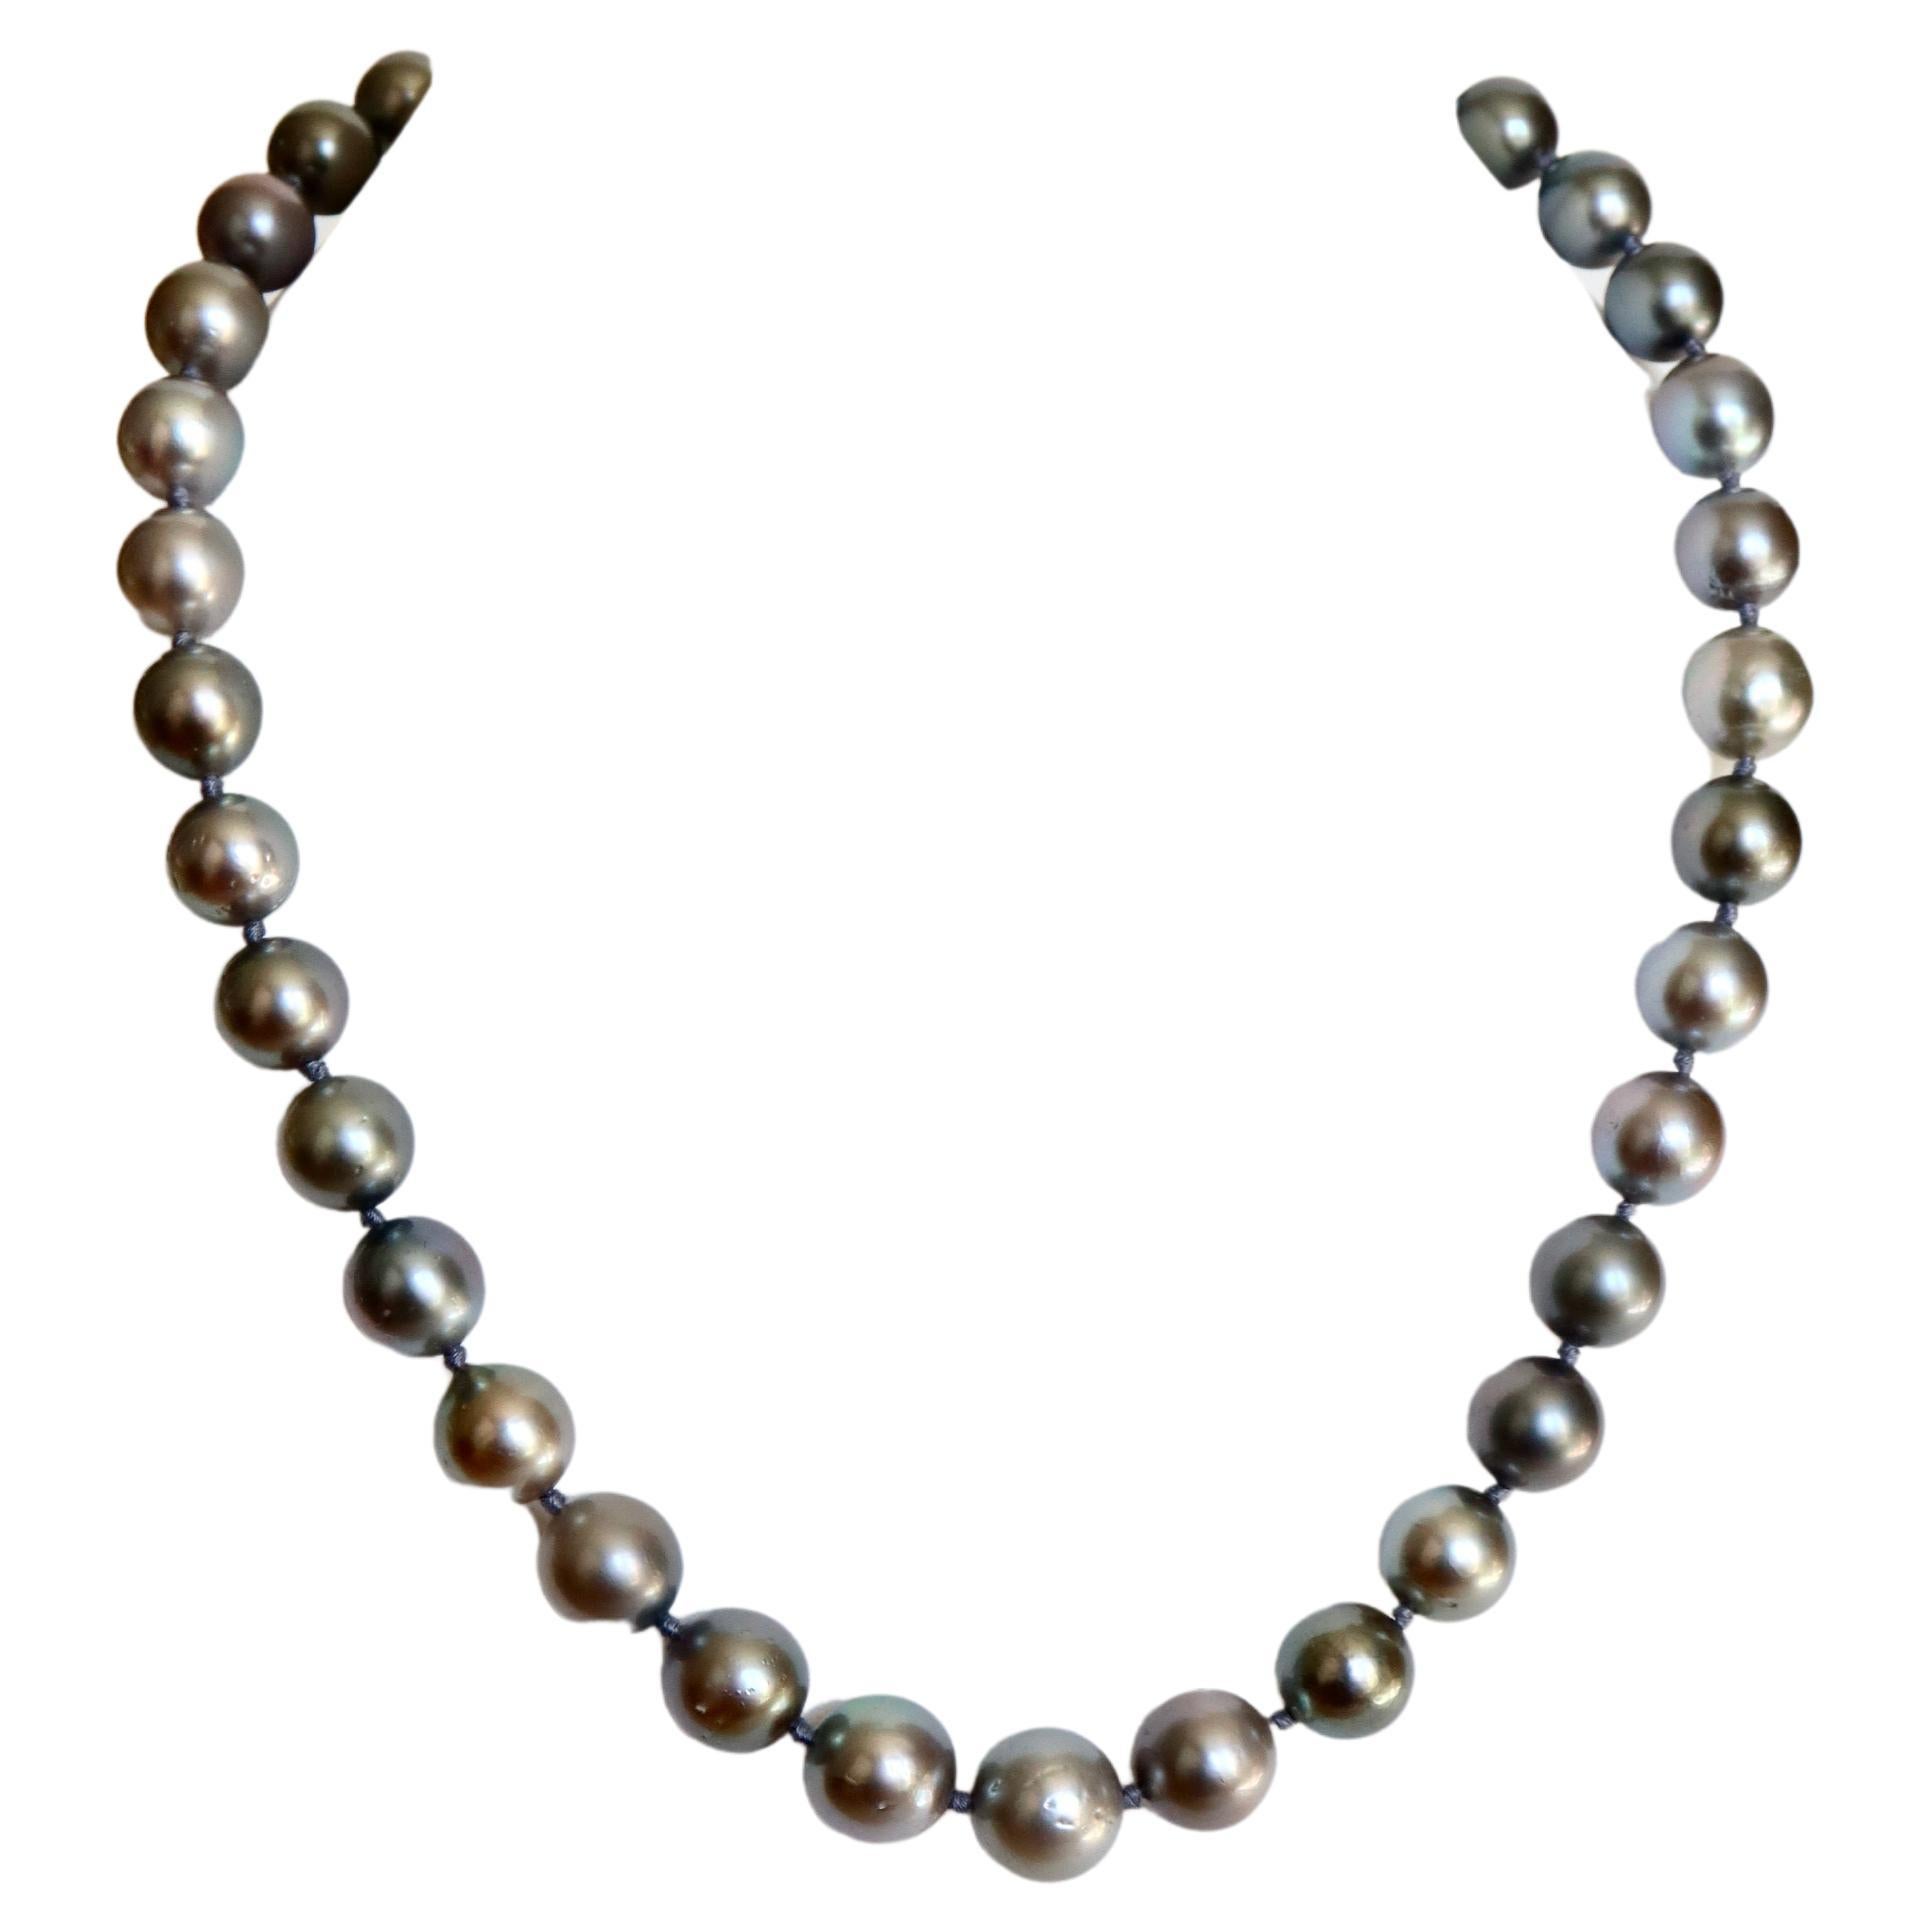 Necklace of Cultured Grey Pearls 9 mm to 13 mm For Sale